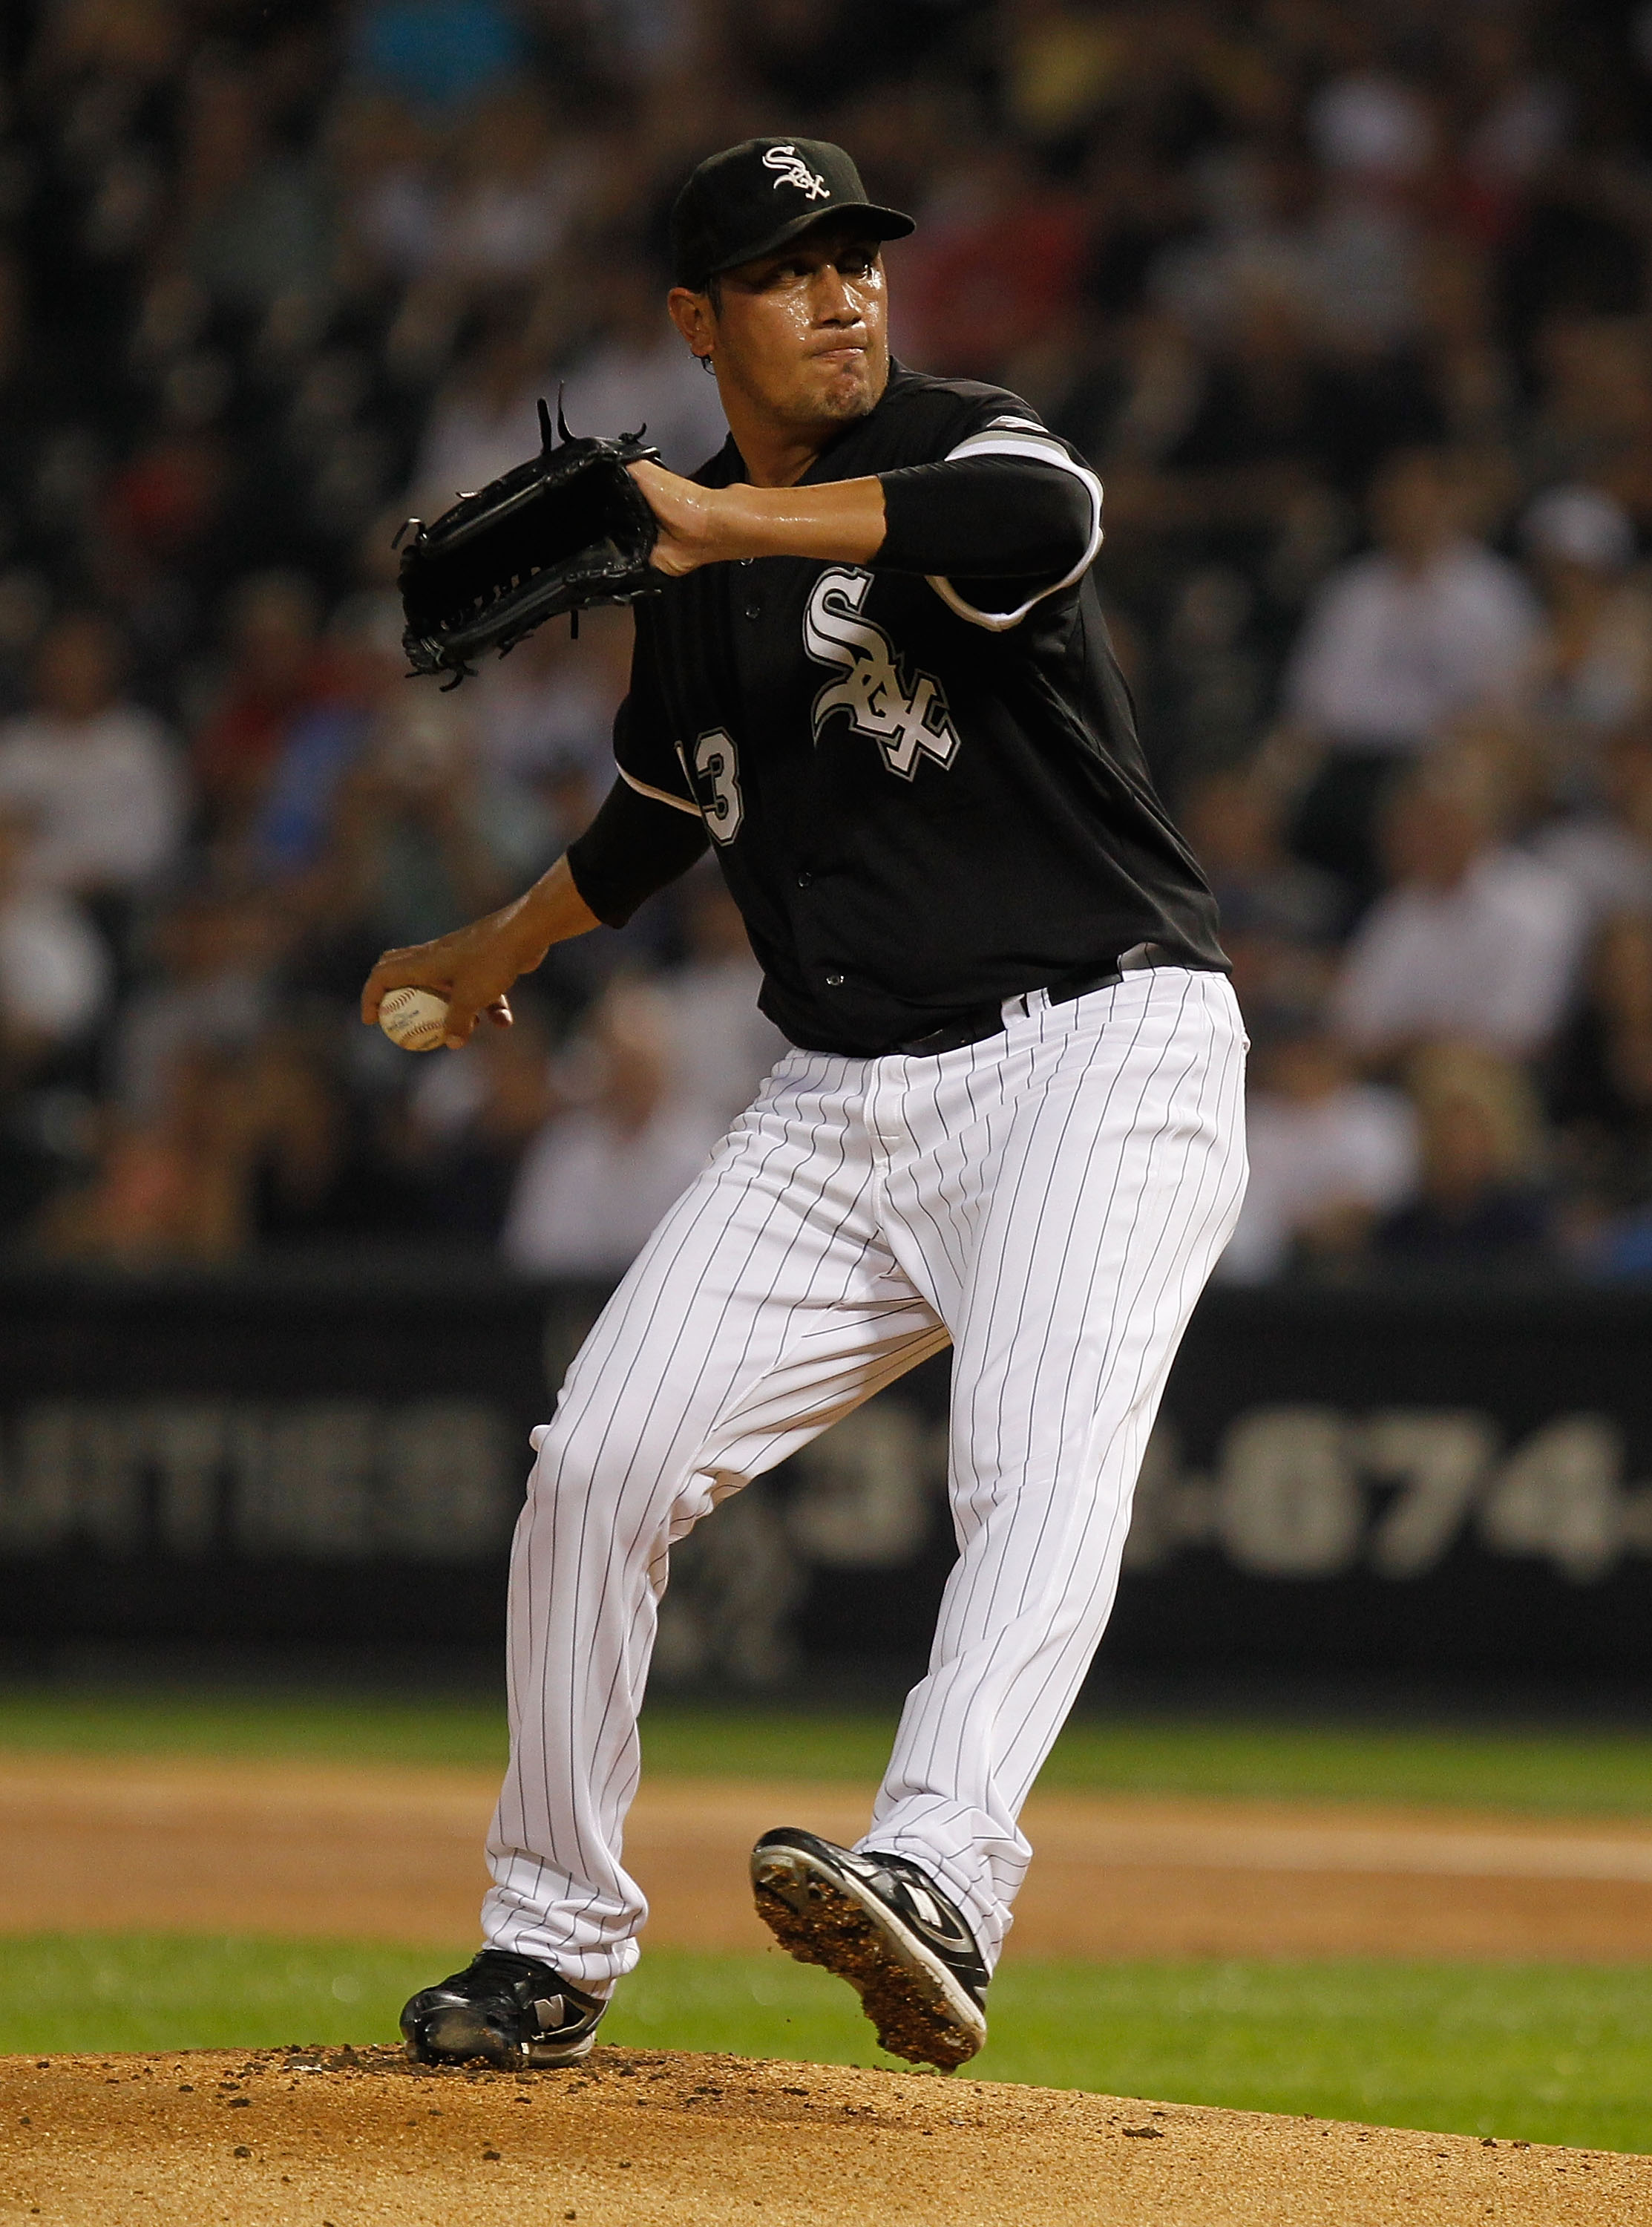 CHICAGO - JULY 07: Starting pitcher Freddy Garcia #43 of the Chicago White Sox delivers the ball against the Los Angeles Angels of Anaheim at U.S. Cellular Field on July 7, 2010 in Chicago, Illinois. The White Sox defeated the Angels 5-2. (Photo by Jonath